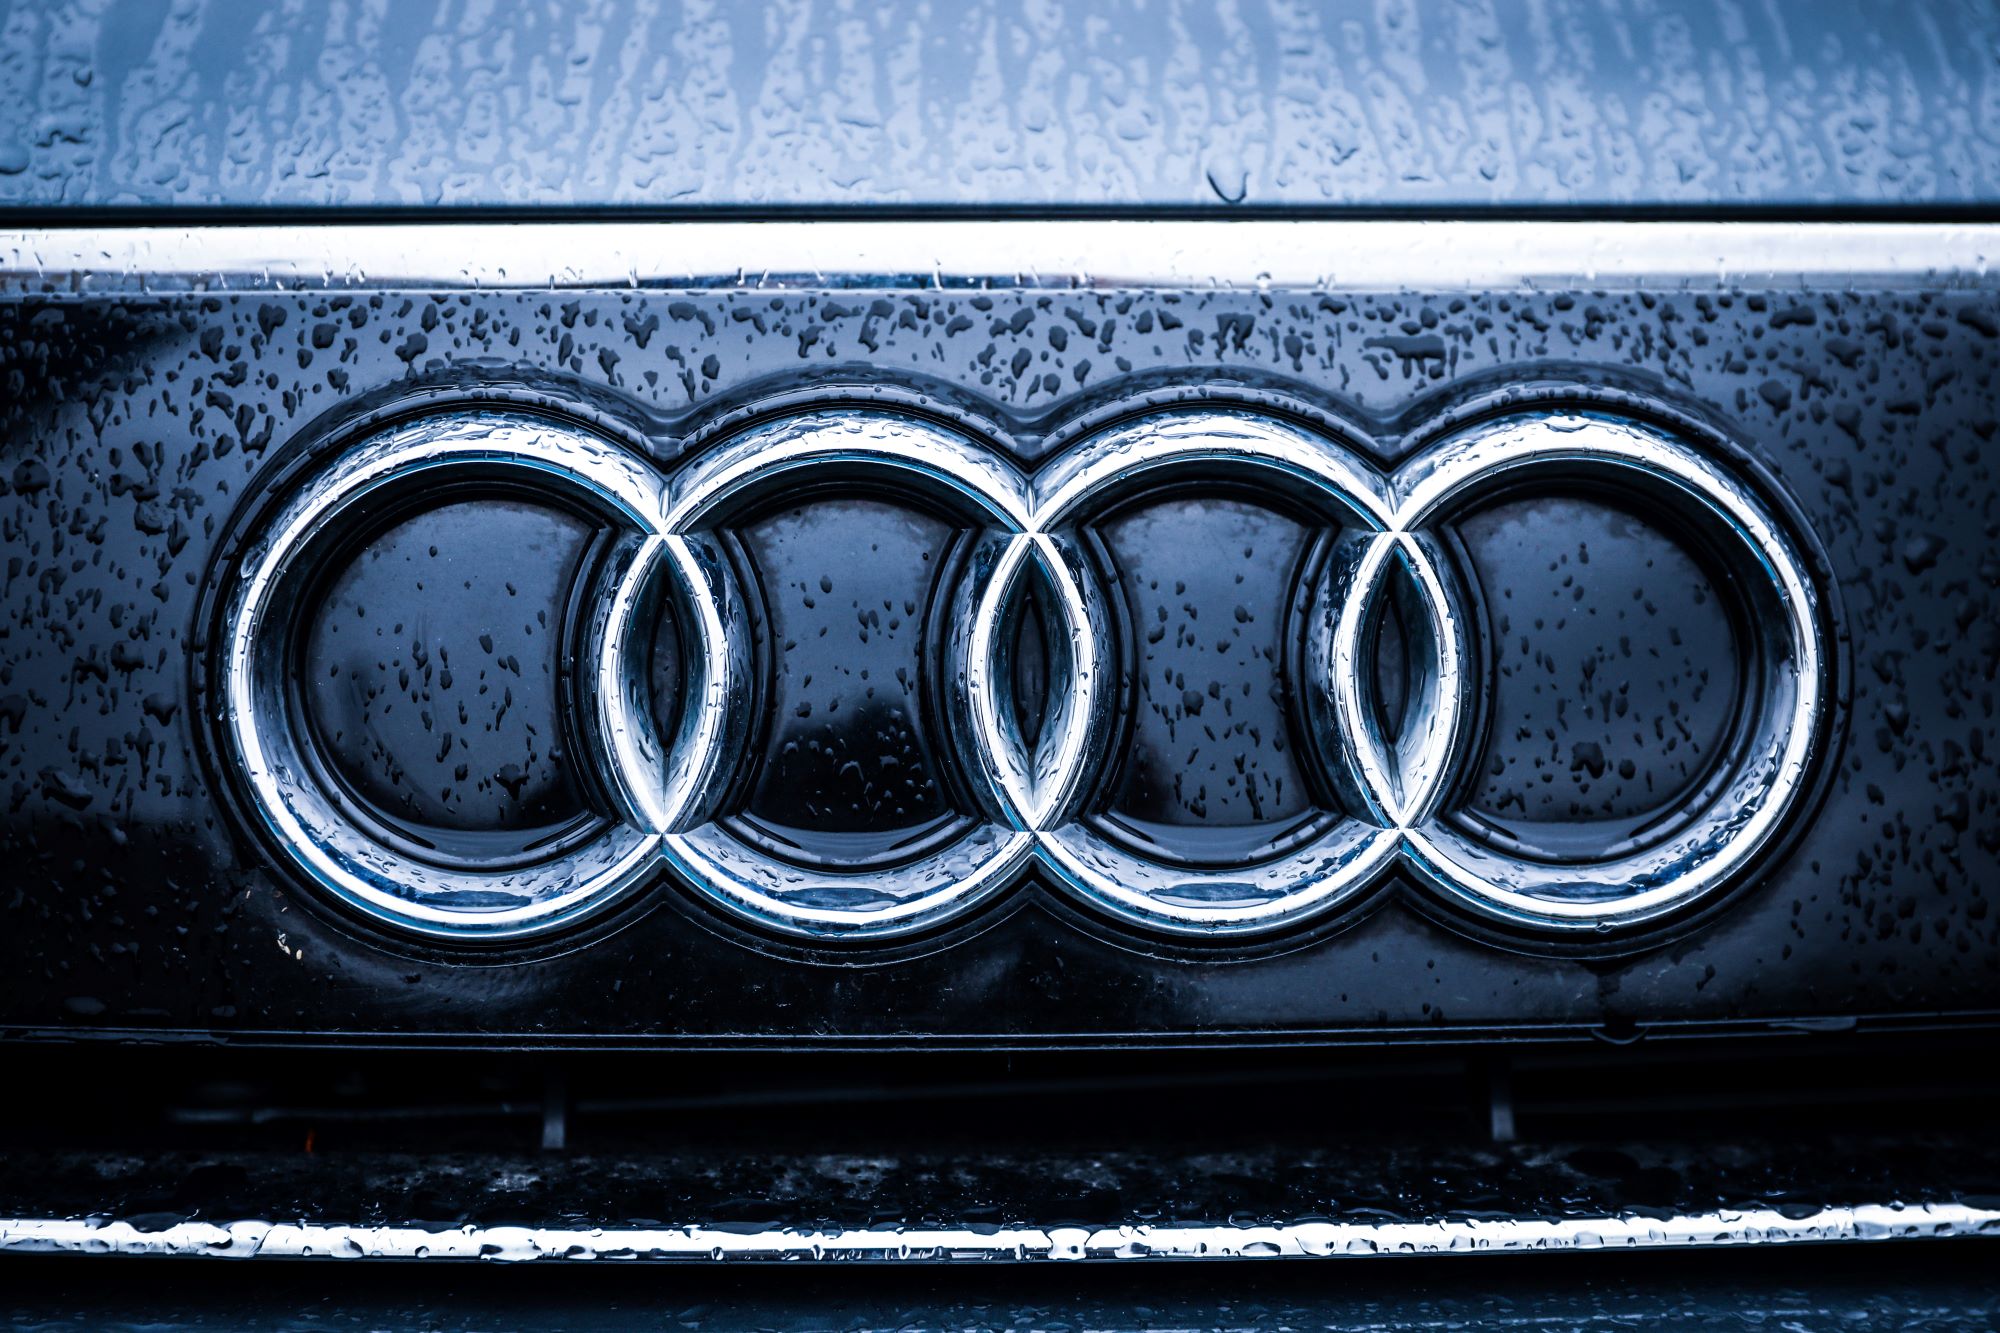 Audi's logo of the four connected rings are placed on a black background of a car grille with raindrops.